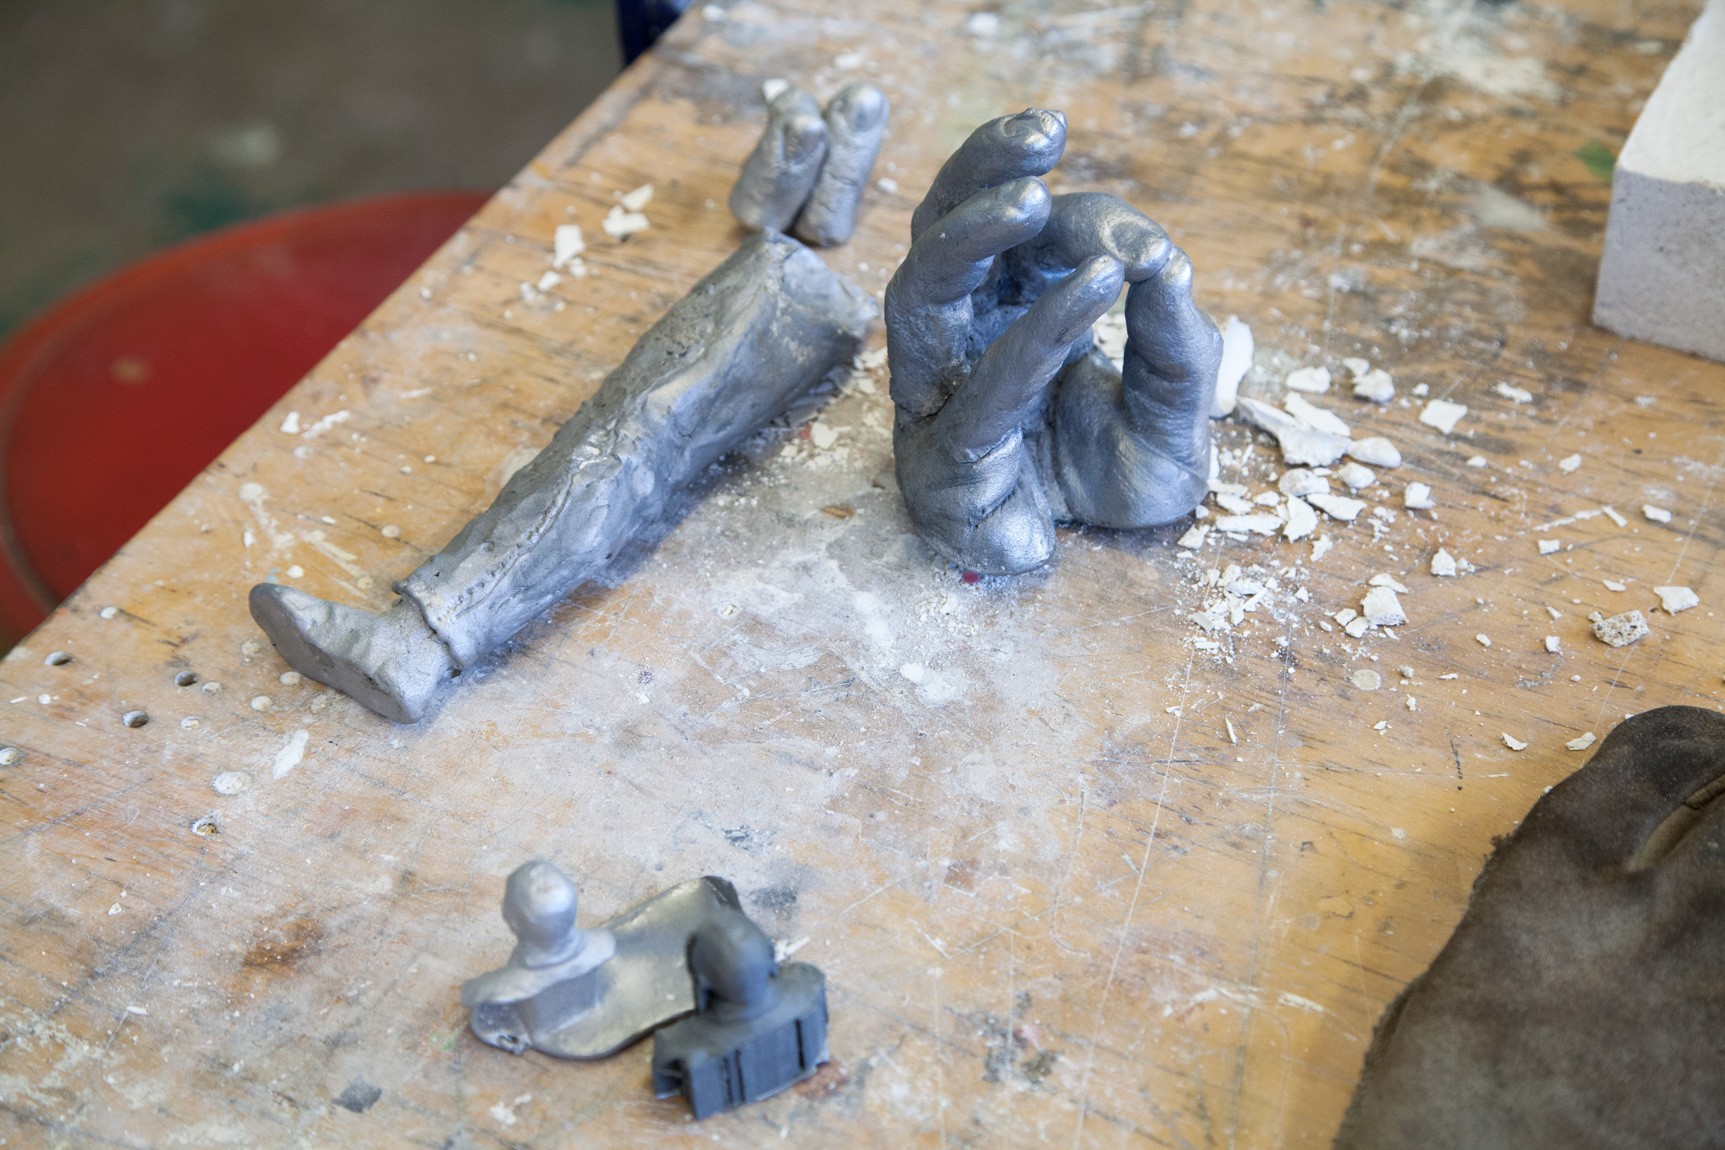 A worktable with metal sculptures of hands, a leg, and a small busts.